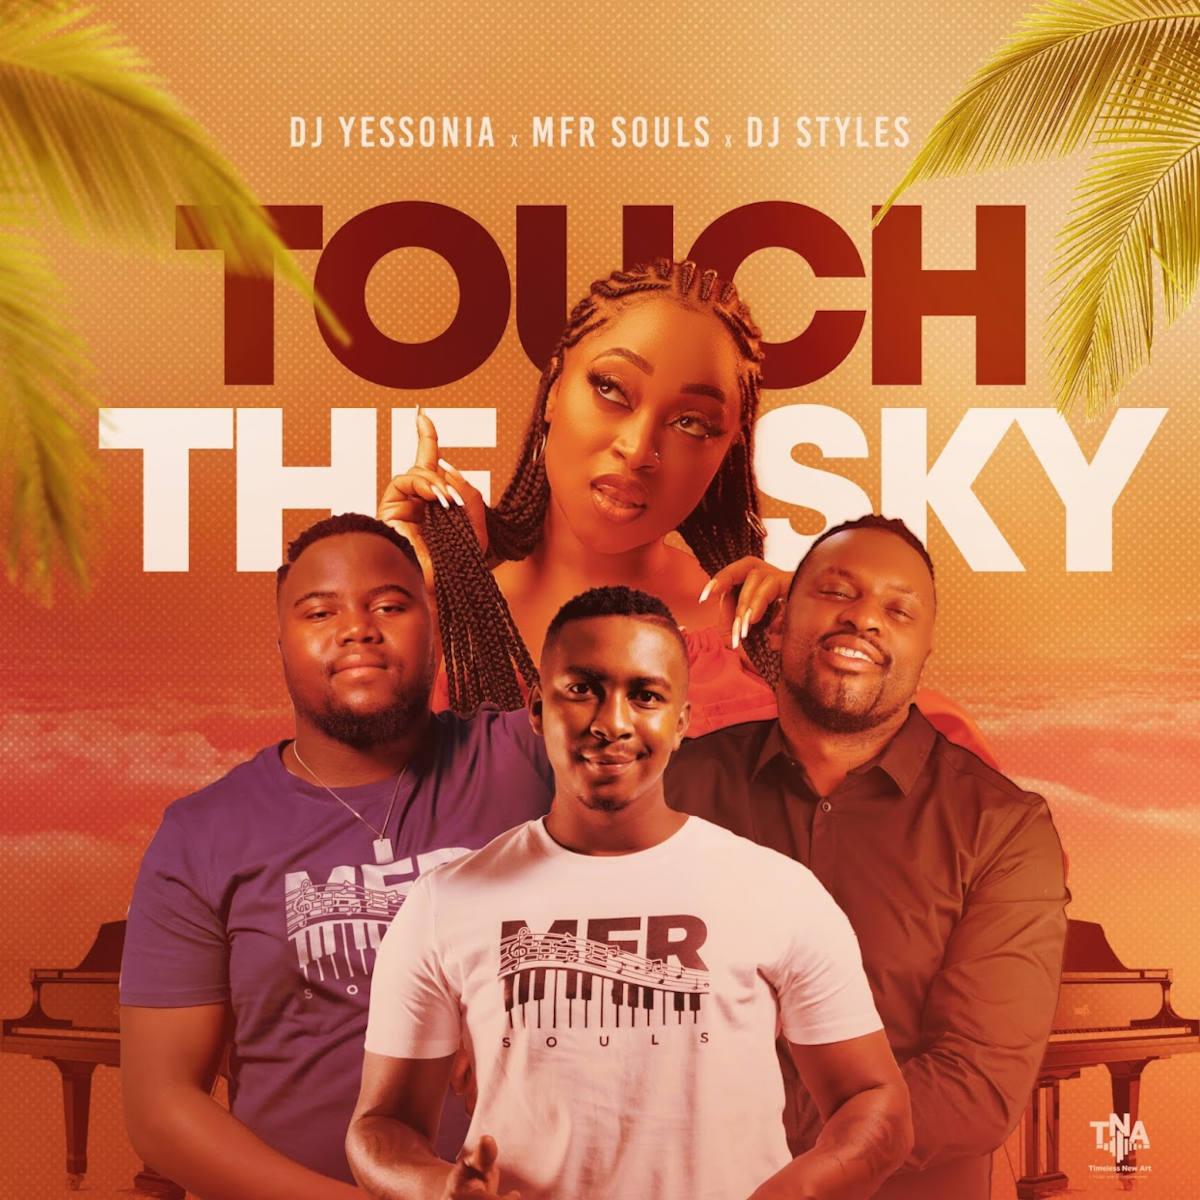 DJ Yessonia - Touch The Sky (feat. MFR Souls & Dj Styles)